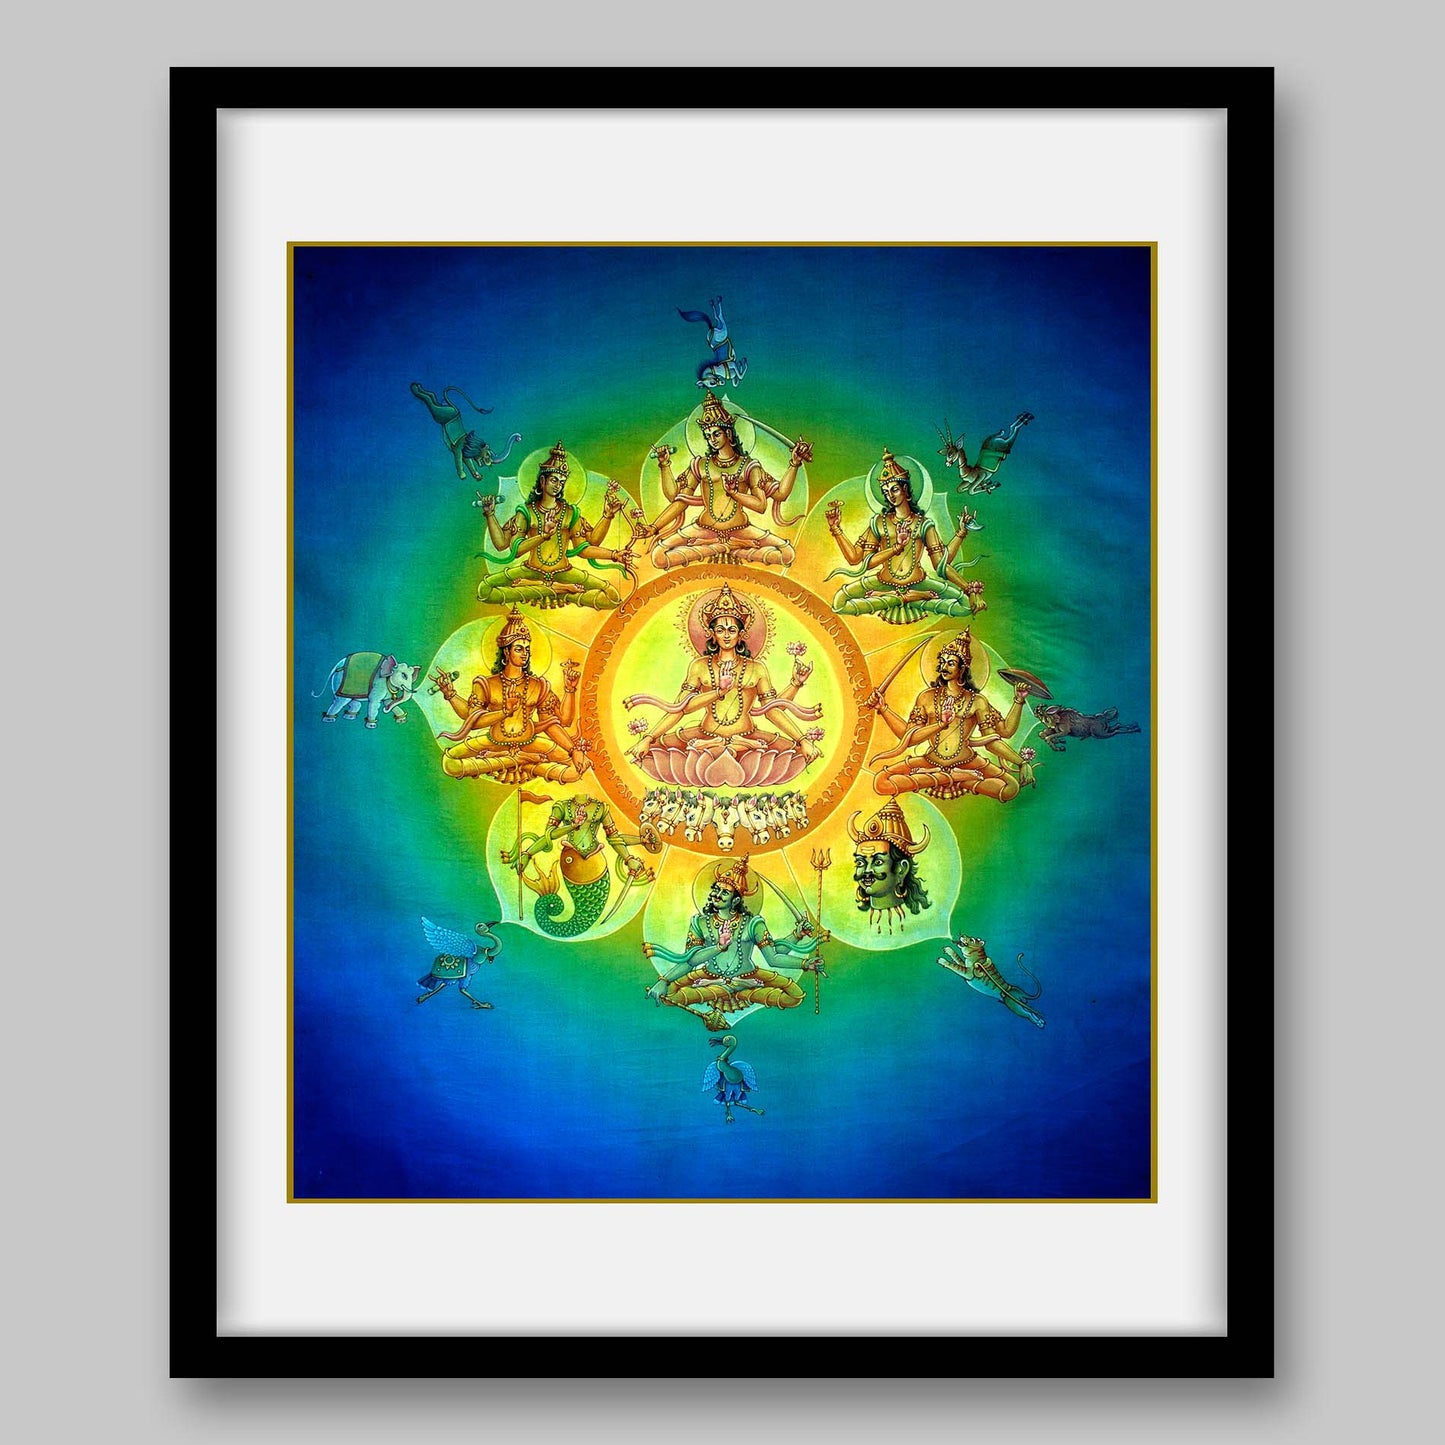 Navagraha – Hindu Planetary Systems Consisting of Nine Planets - High Quality Print of Artwork by Pieter Weltevrede